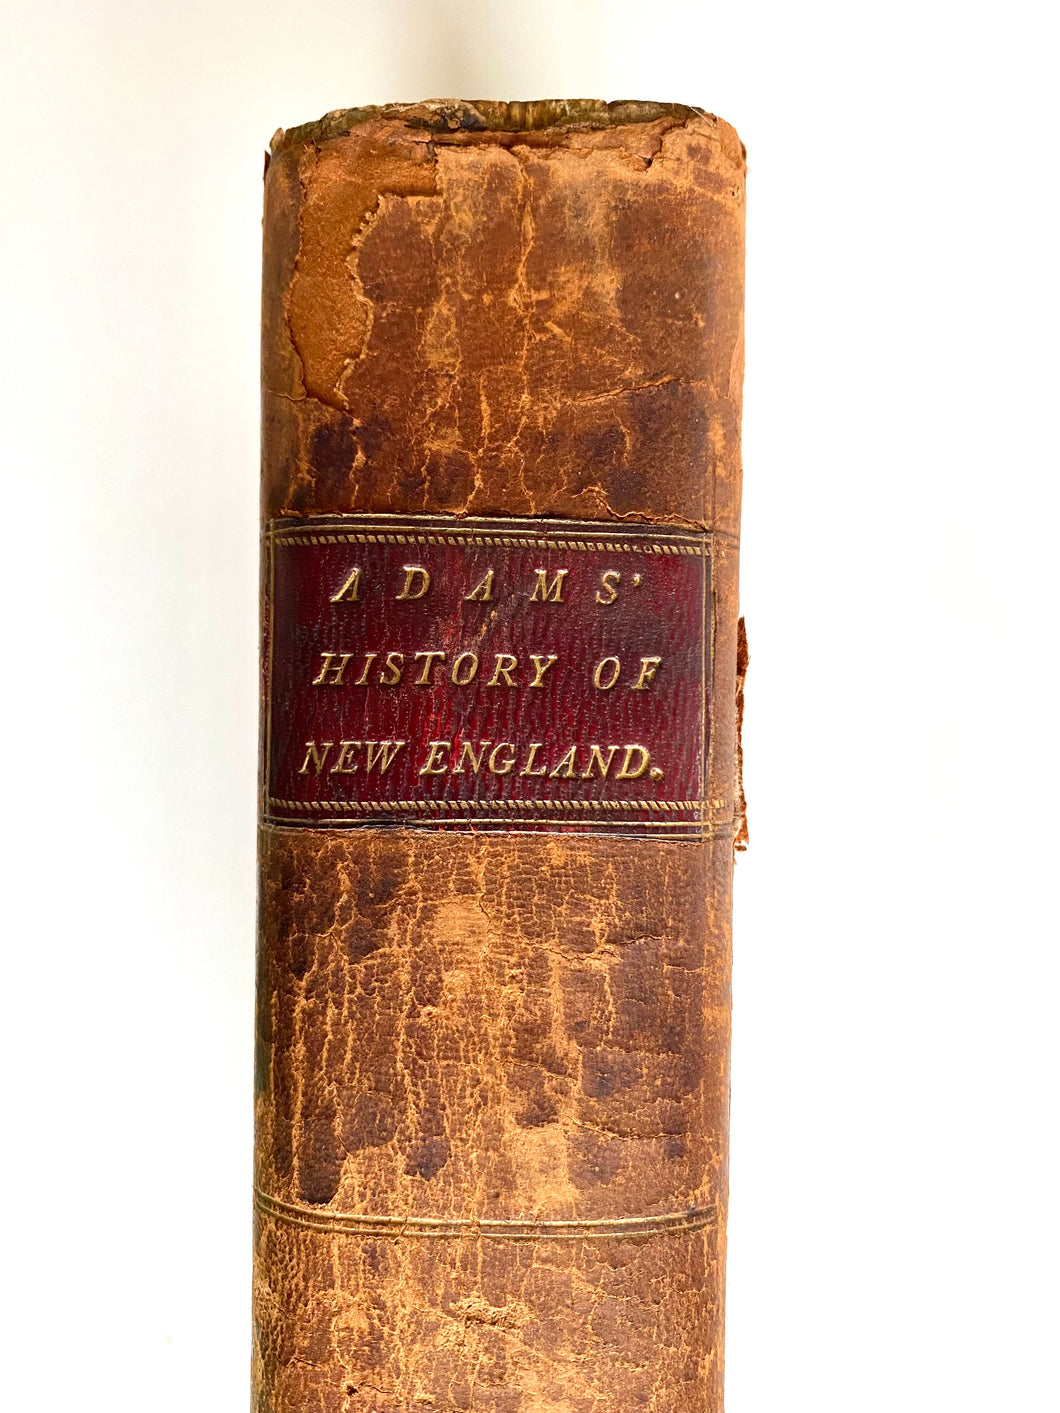 1799 HANNAH ADAMS. History of Revolutionary War - First Full-Time Female Author in America!